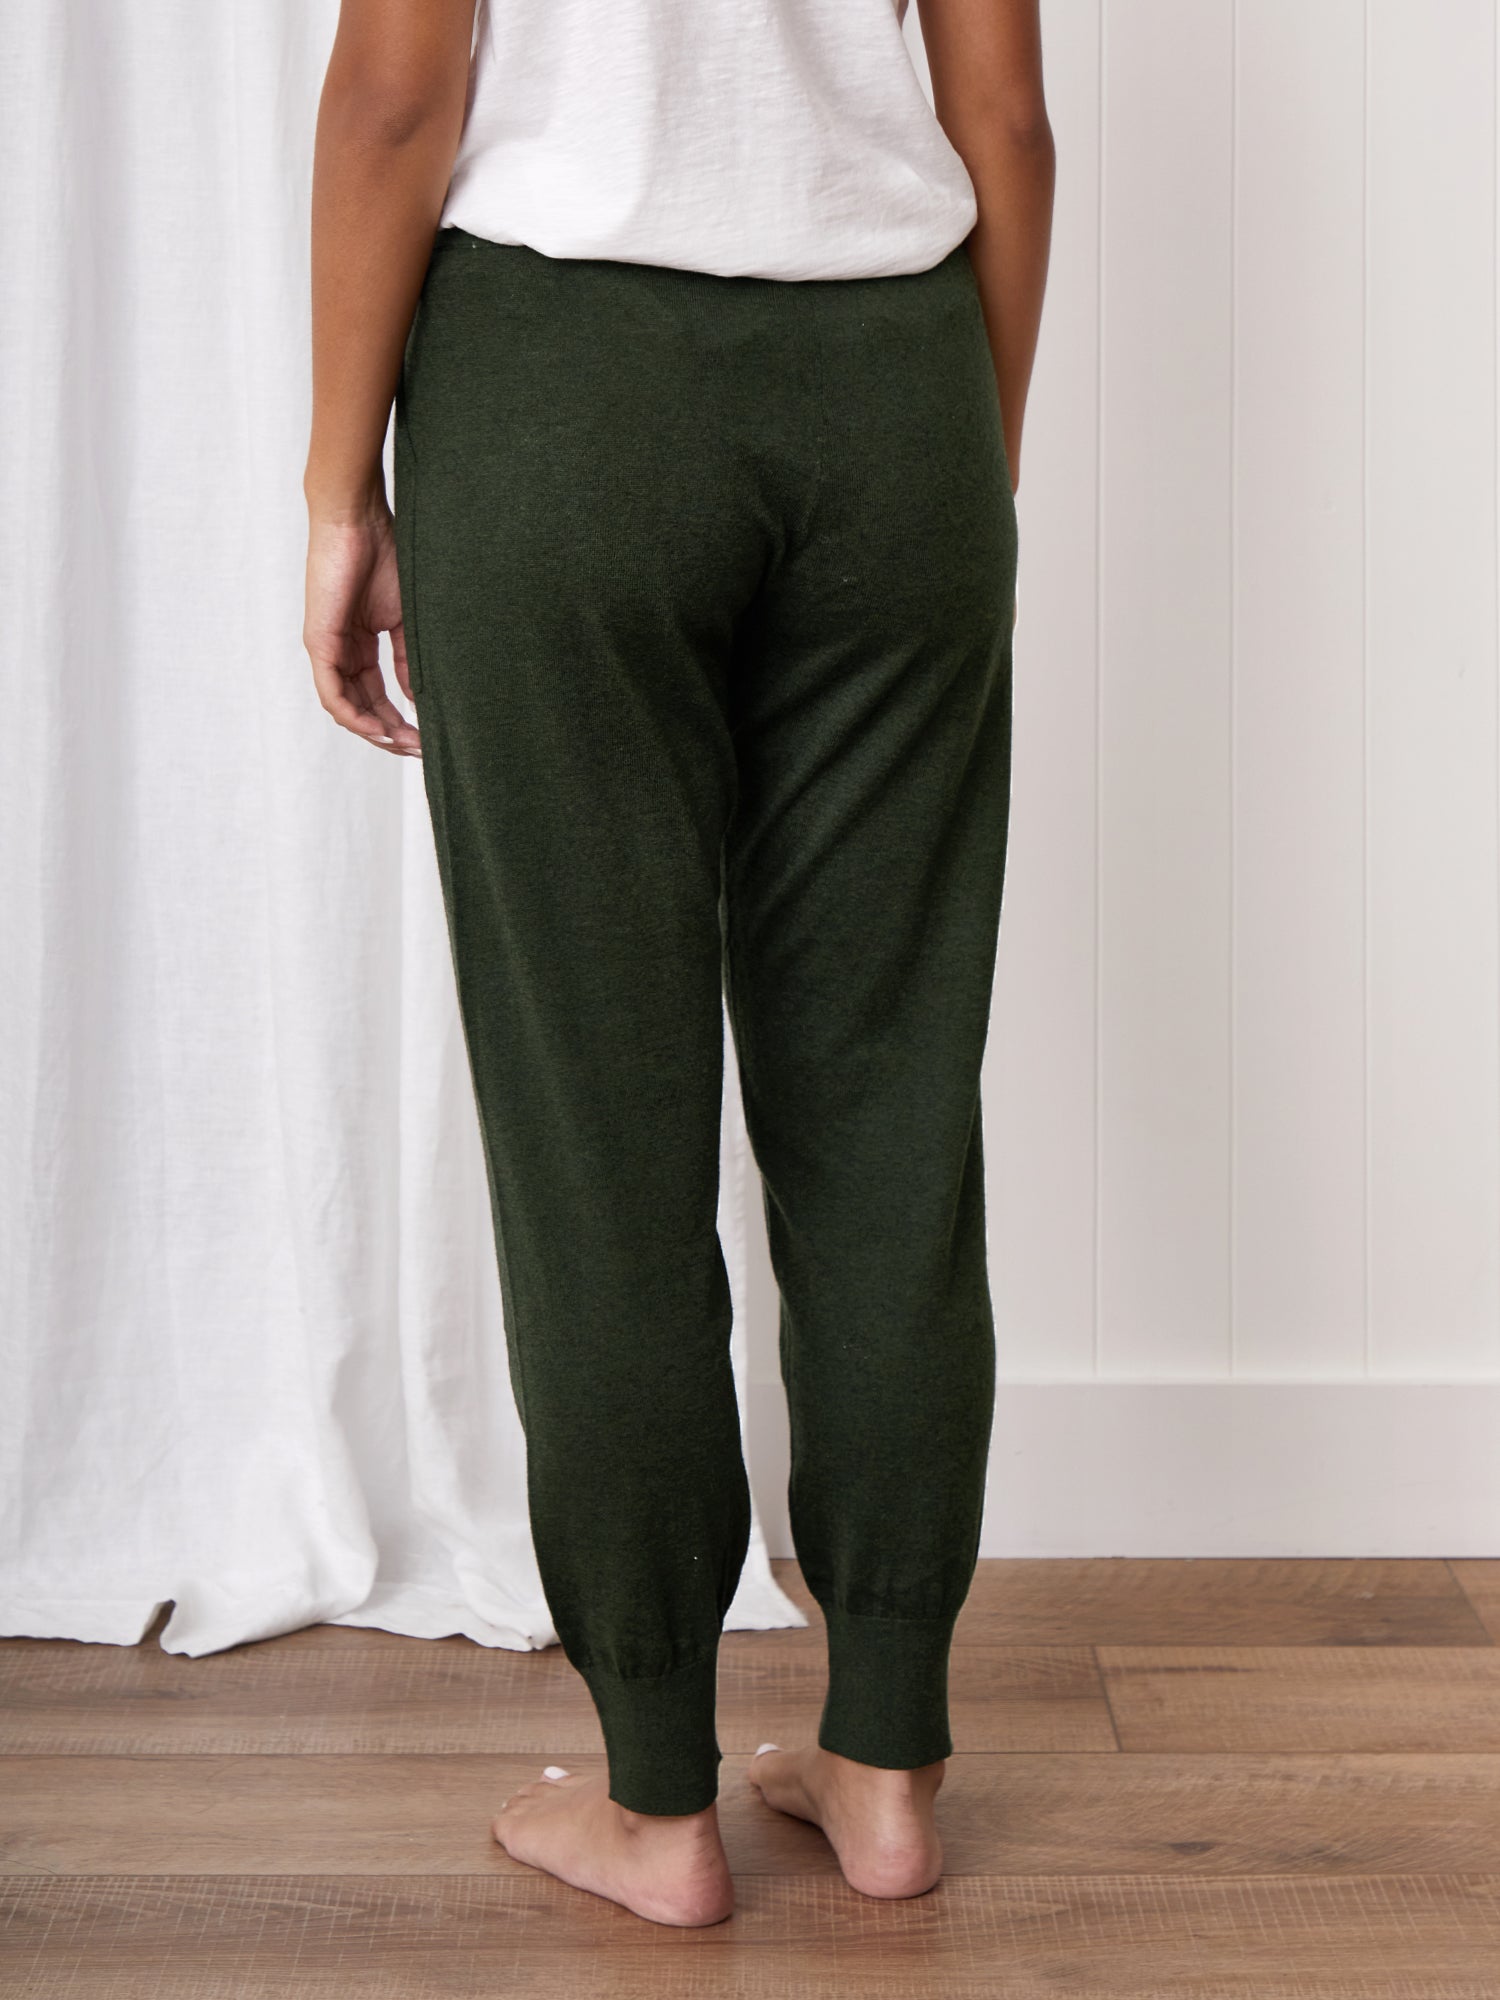 https://www.wallacecotton.com/content/products/cotton-cashmere-lounge-pants-green-4-9803.jpg?width=1500